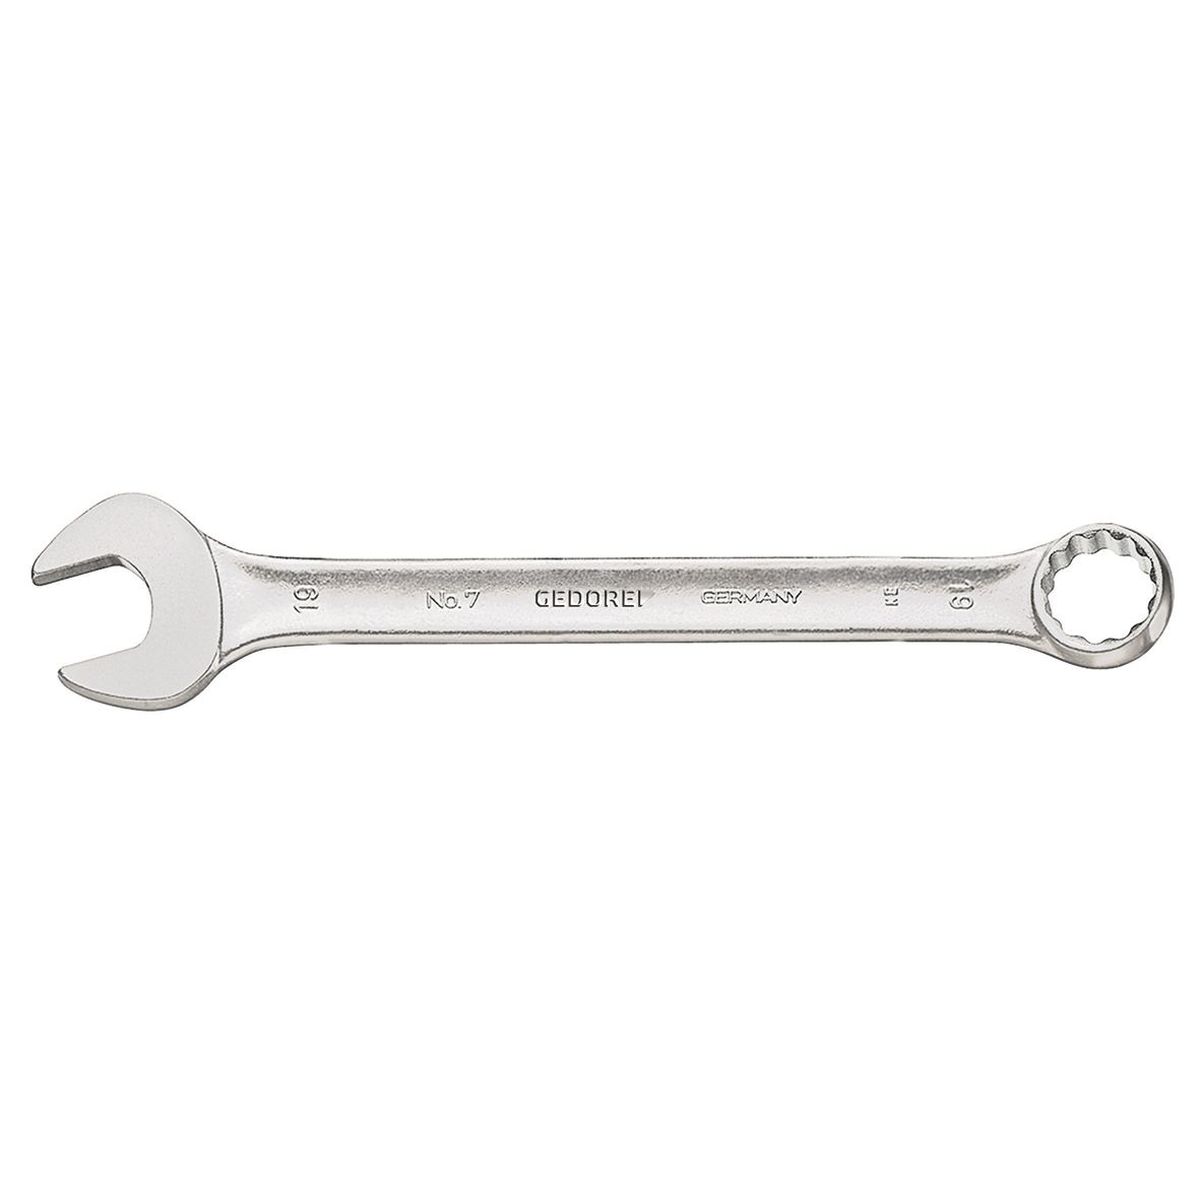 Combination spanner 23mm No.7 23 Gedore